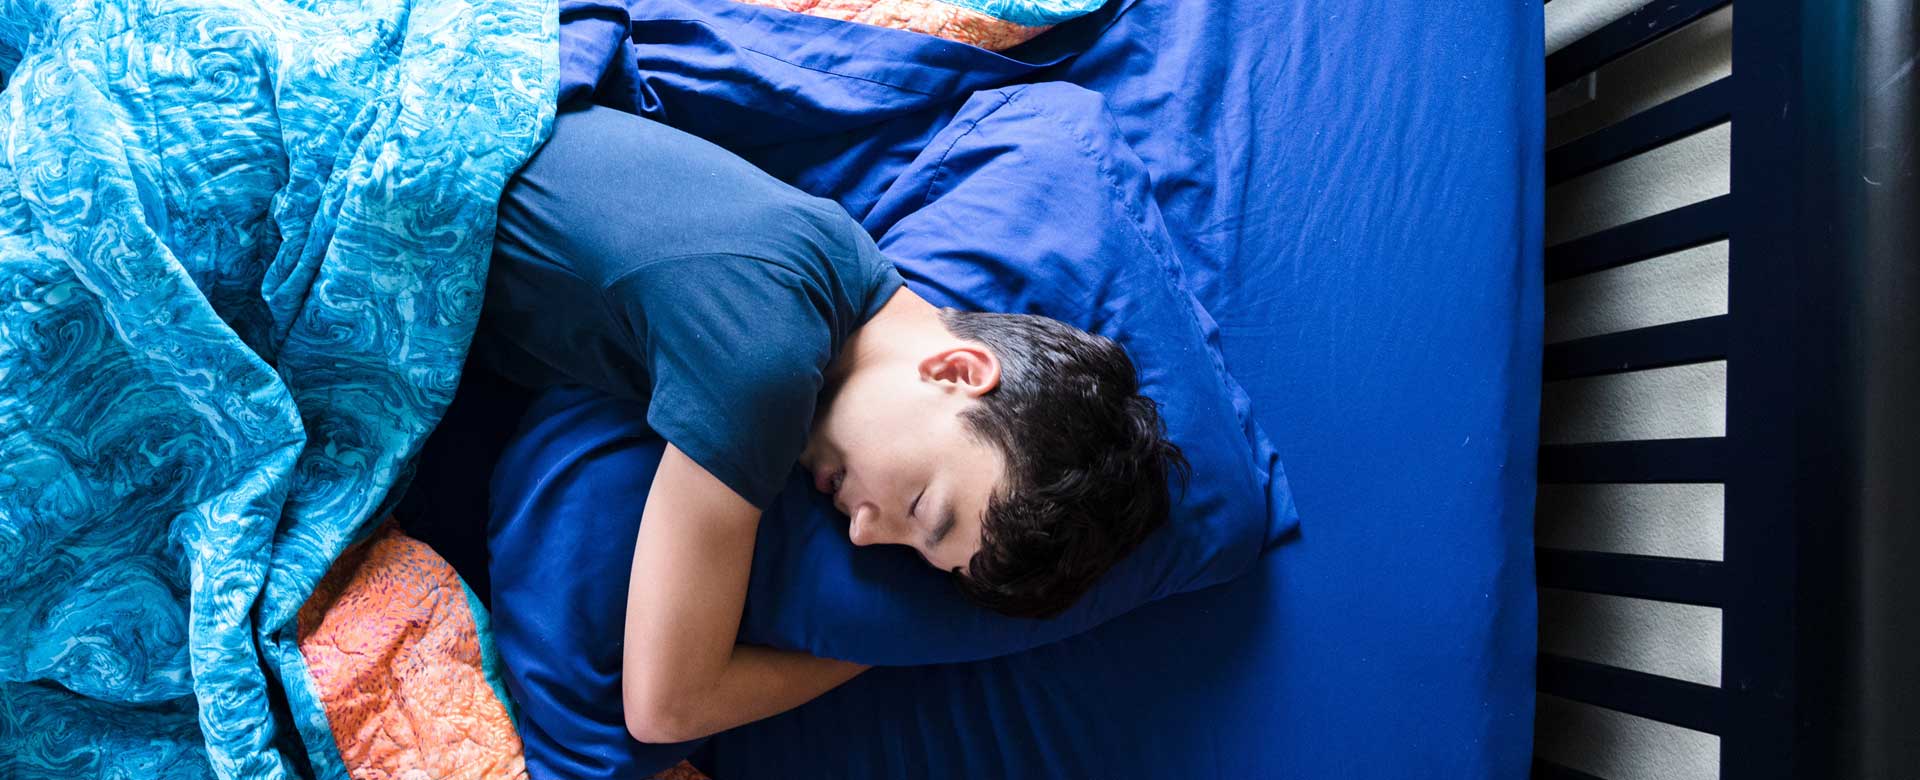 A teenager hugs his pillow as he sleeps in his bed